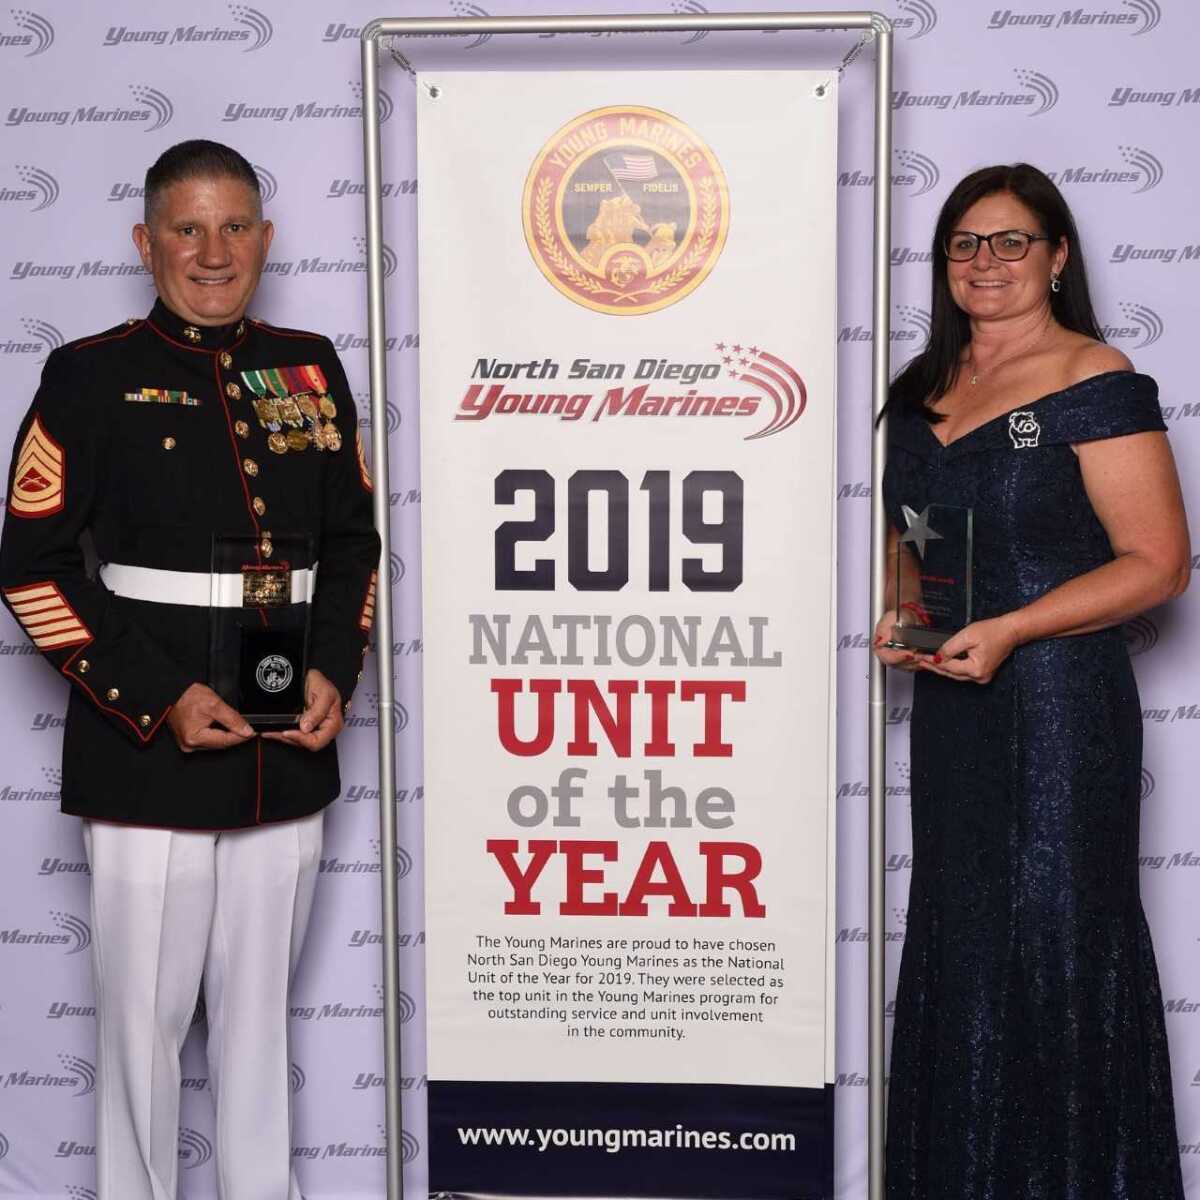 Cal Grimes, unit commander of North San Diego Young Marines and Marie Smith, adjutant of North San Diego Young Marines, at the Young Marines Adult Leaders Conference in Orlando, Fla., after they won “National Unit of the Year” for 2019.